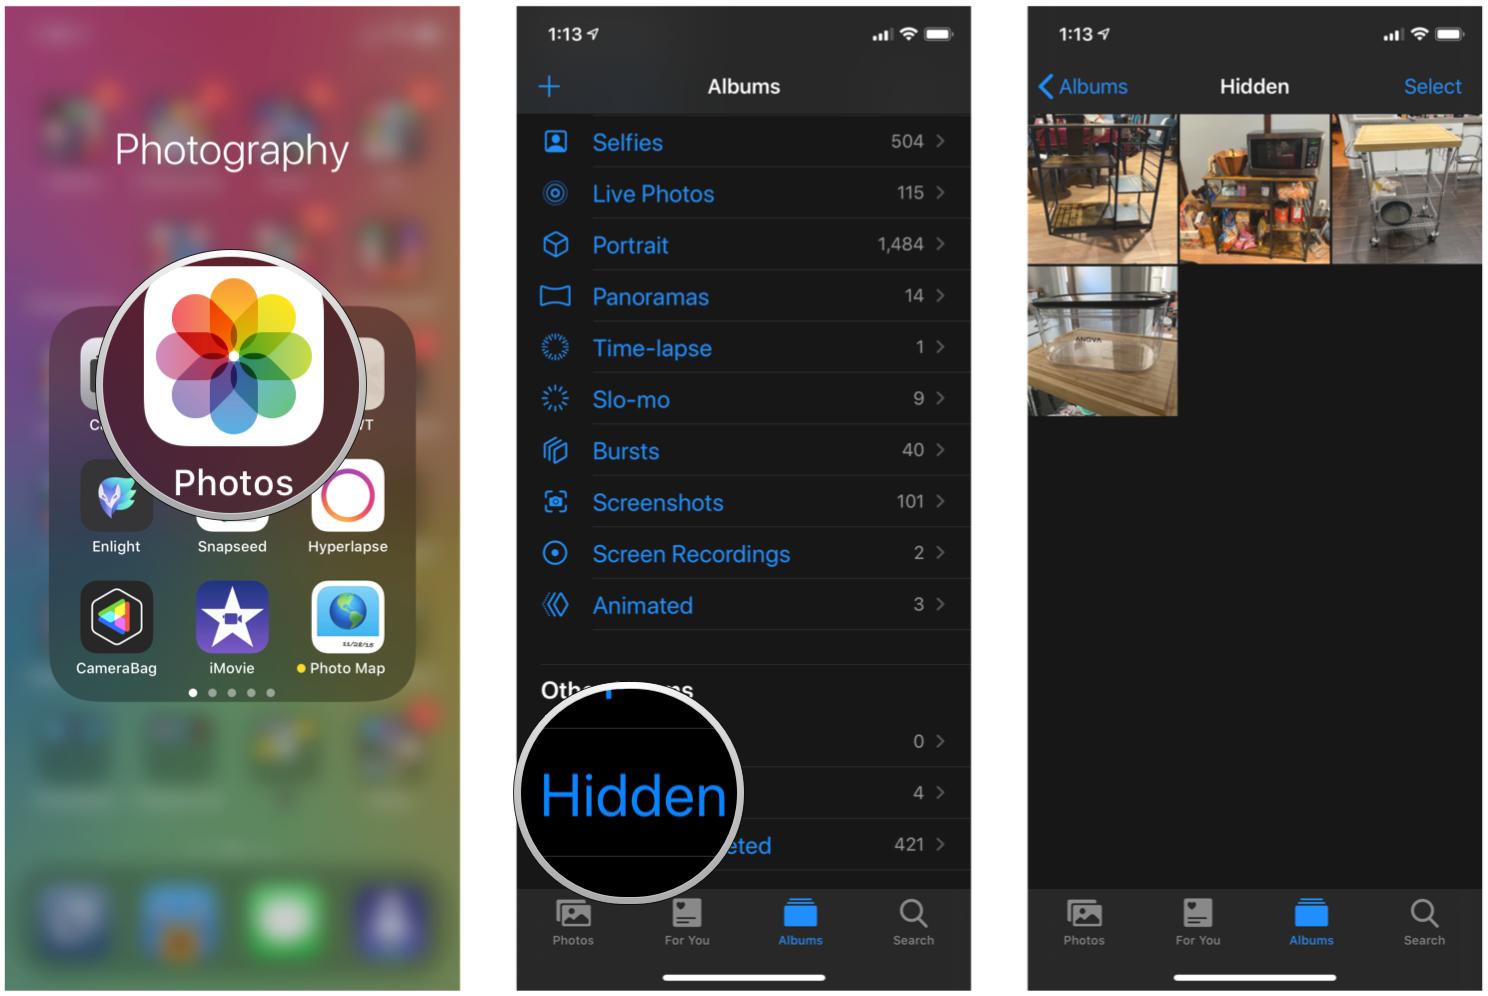 View hidden photos and video on iPhone and iPad by showing steps: Launch Photos, scroll down, tap the Hidden album